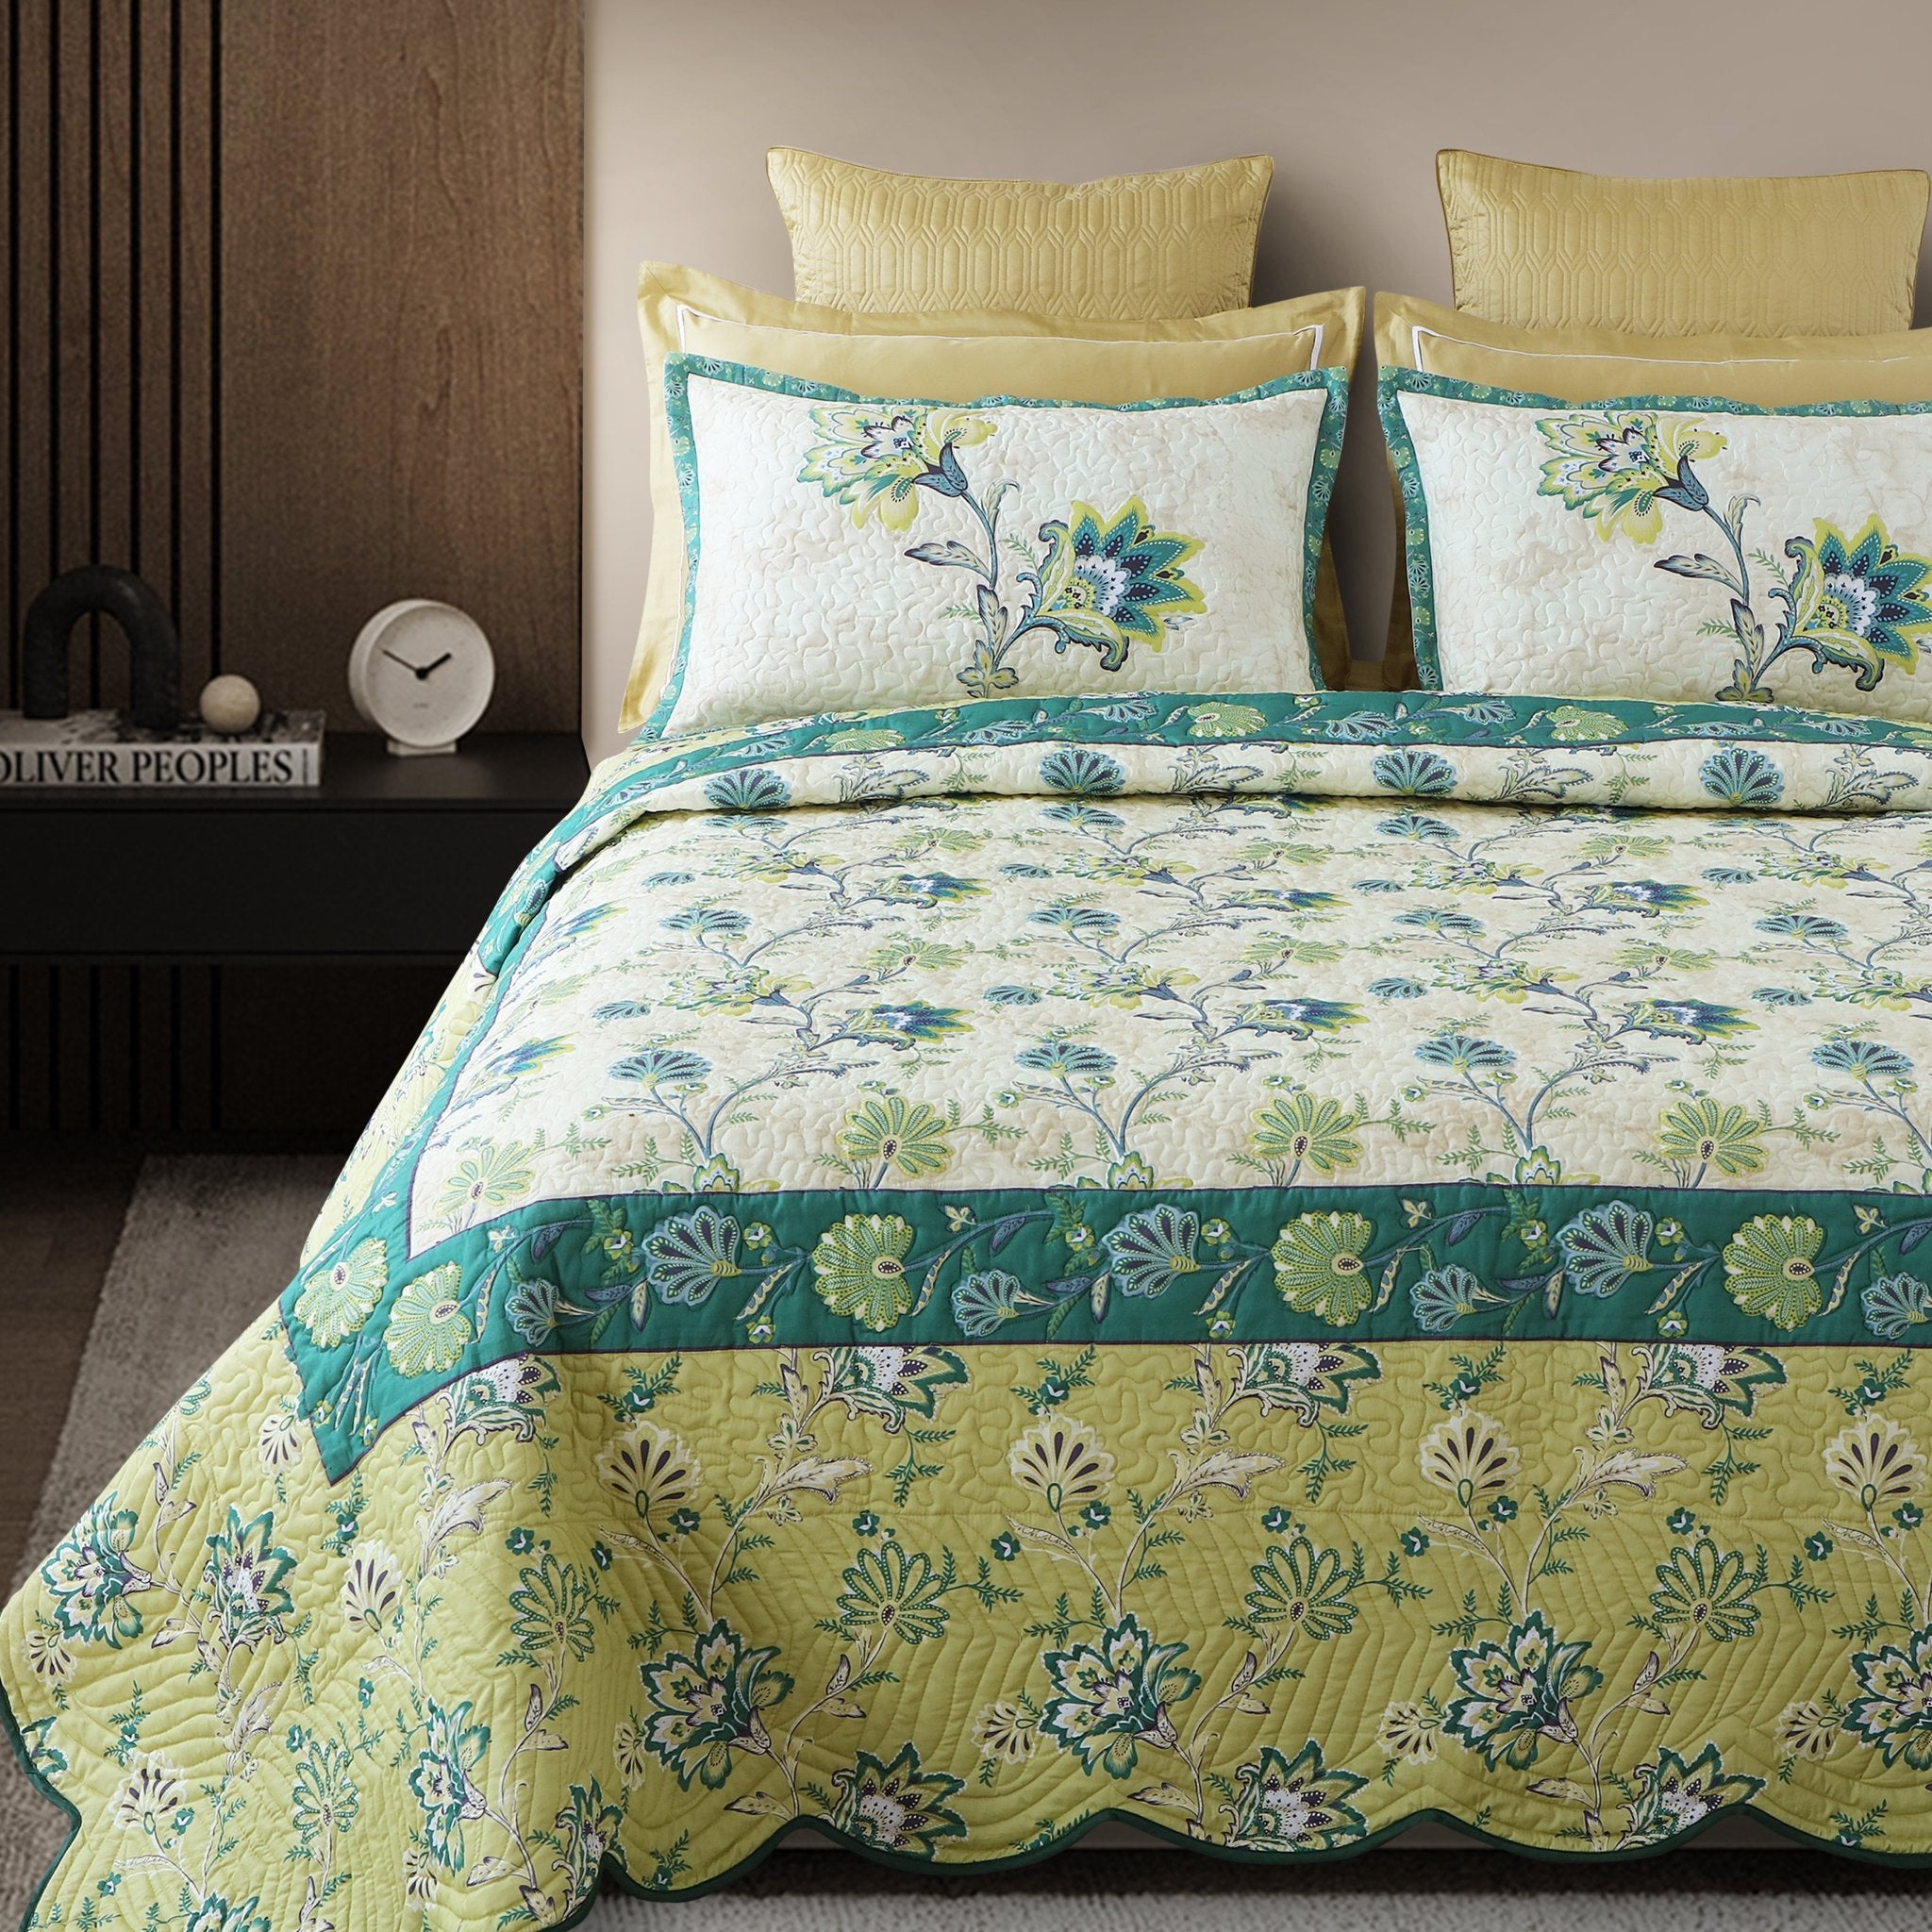 Malako Fleur Botanique Green King Size 100% Cotton Quilted Bed Cover Set - MALAKO